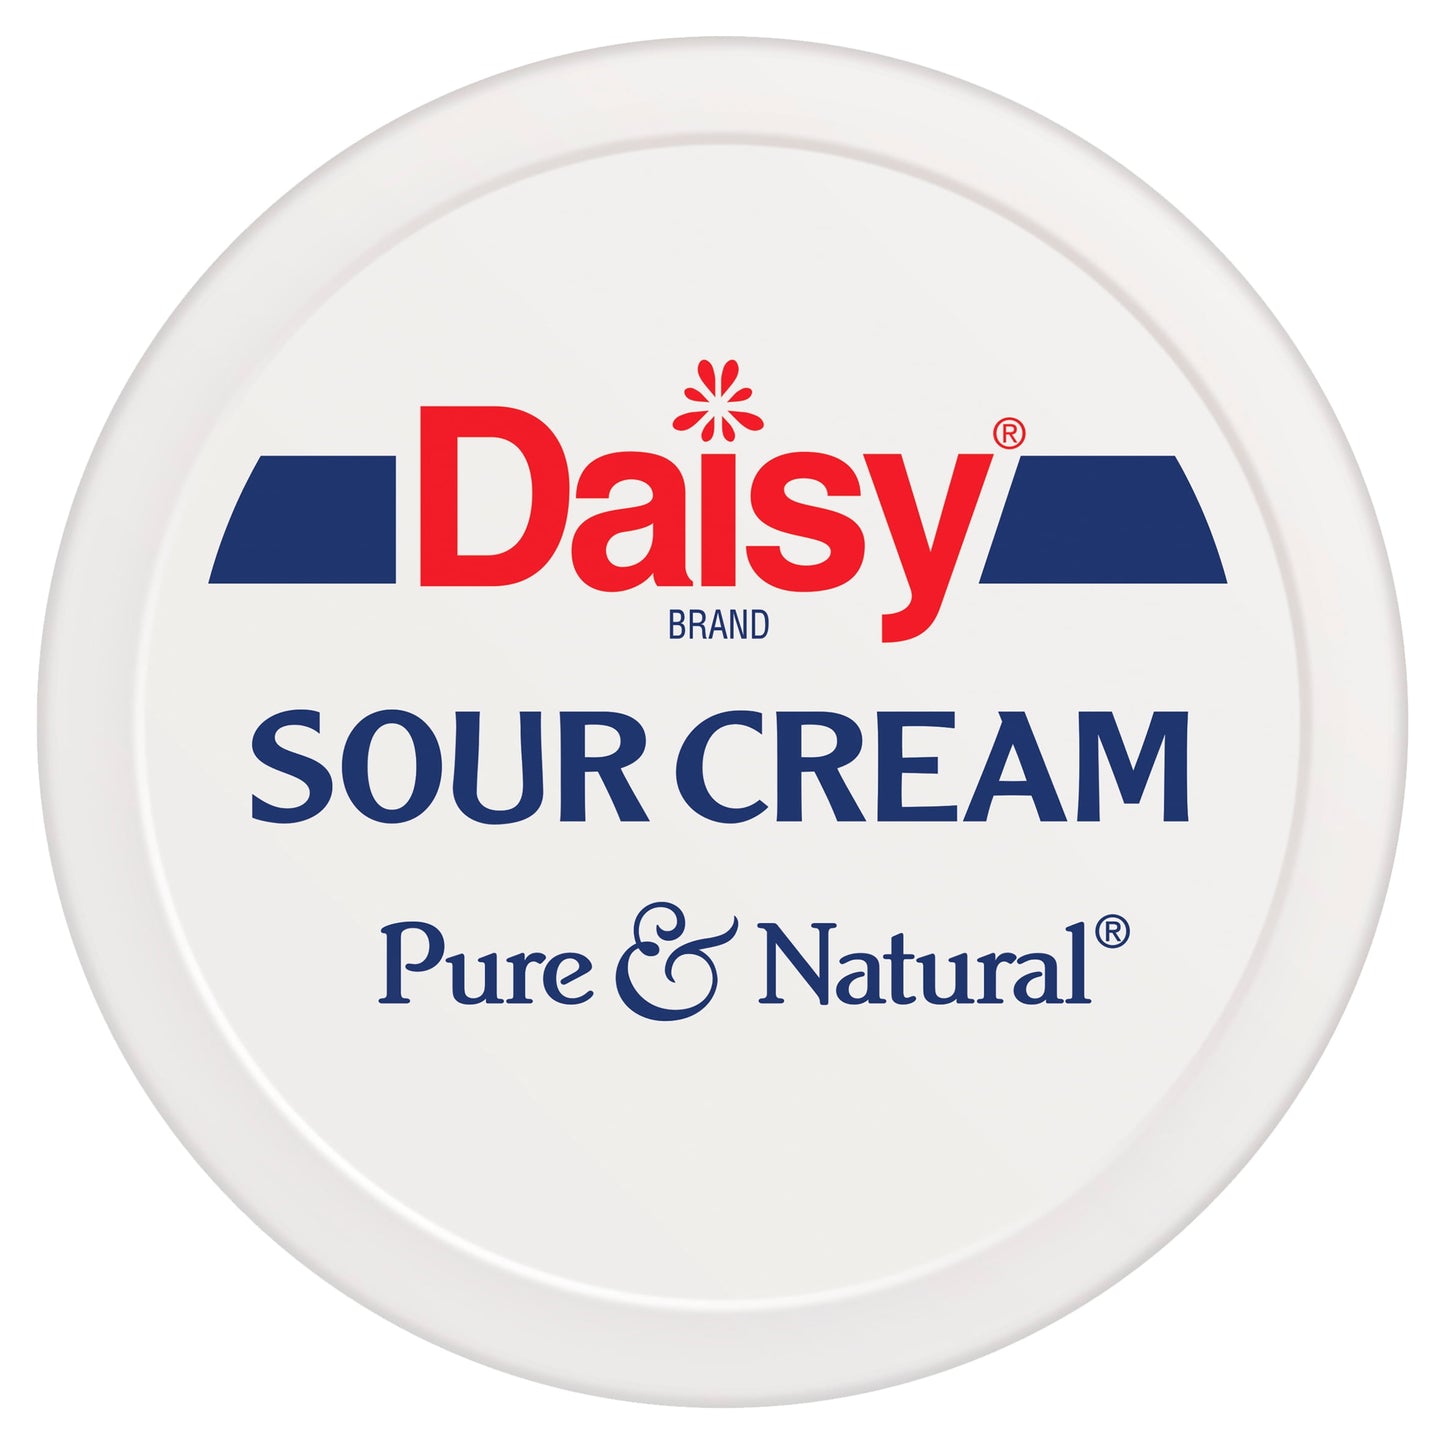 Daisy Pure and Natural Sour Cream, 16 oz (1 lb) Tub (Refrigerated)